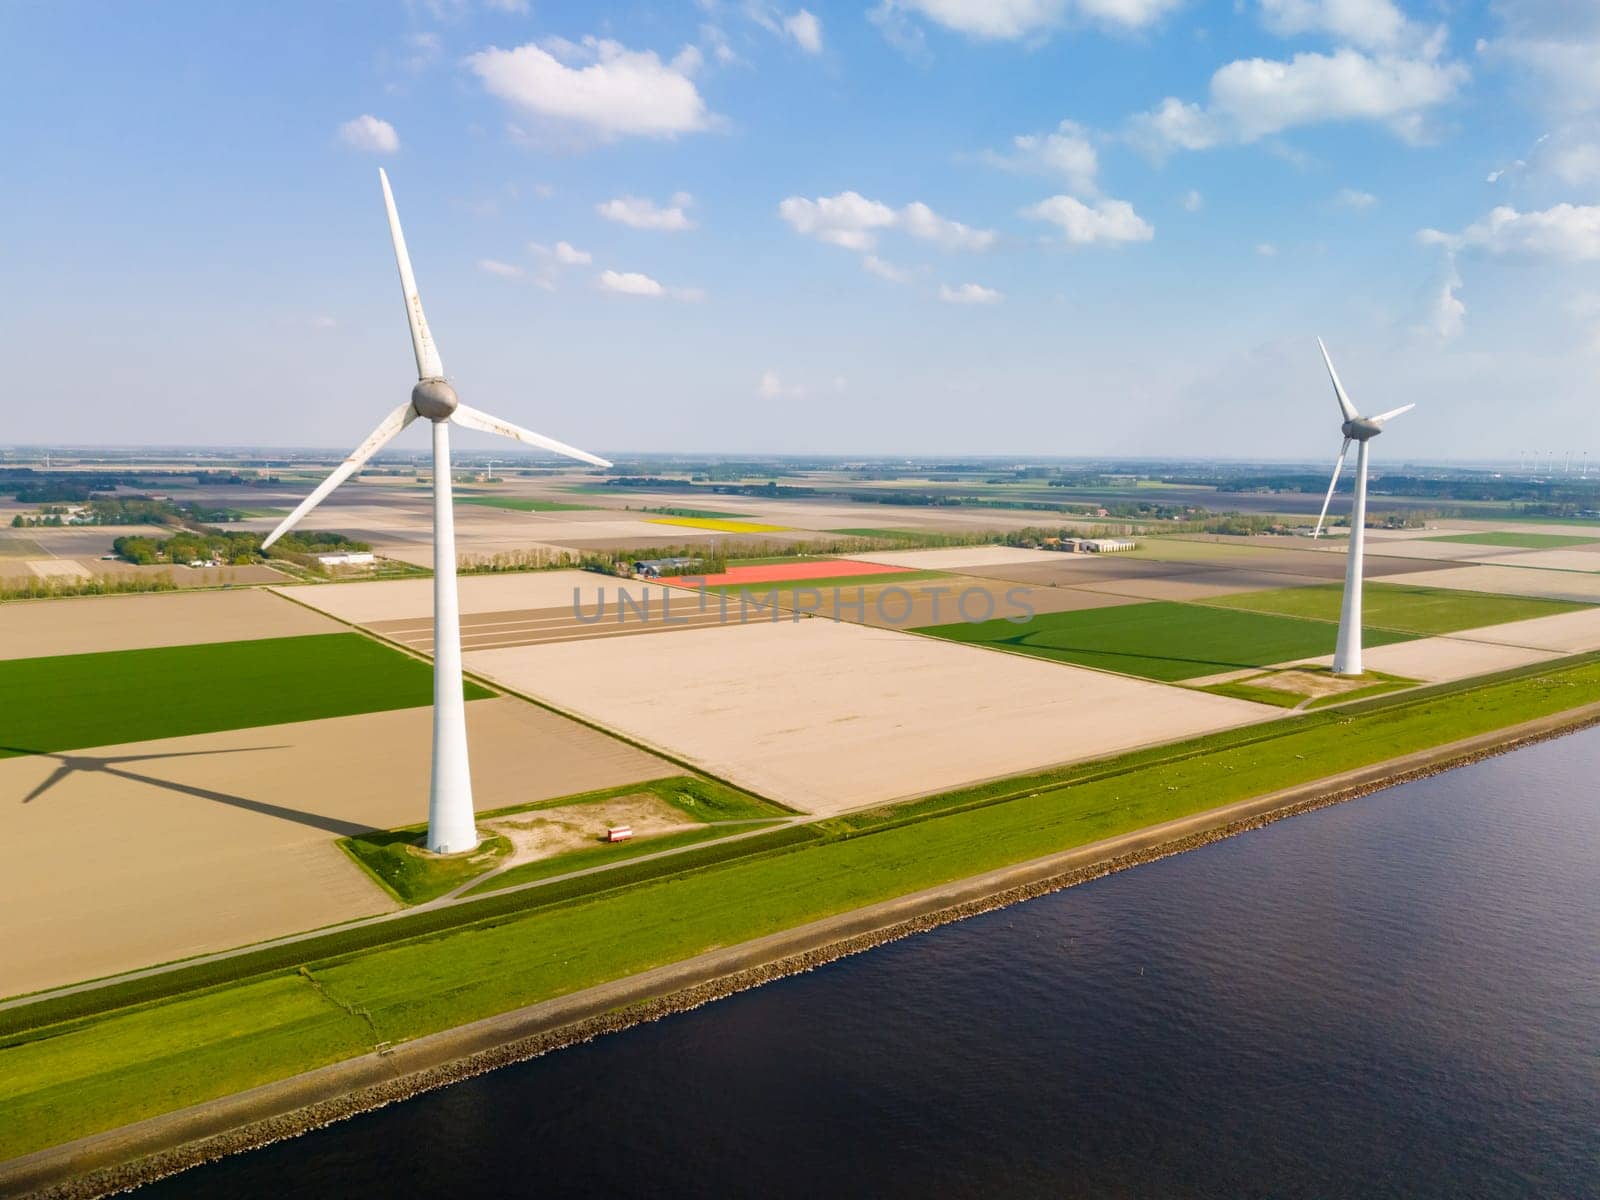 A mesmerizing aerial view of a wind farm in Flevoland, Netherlands, where towering windmills stand gracefully in the wind, generating renewable energy for the region by fokkebok